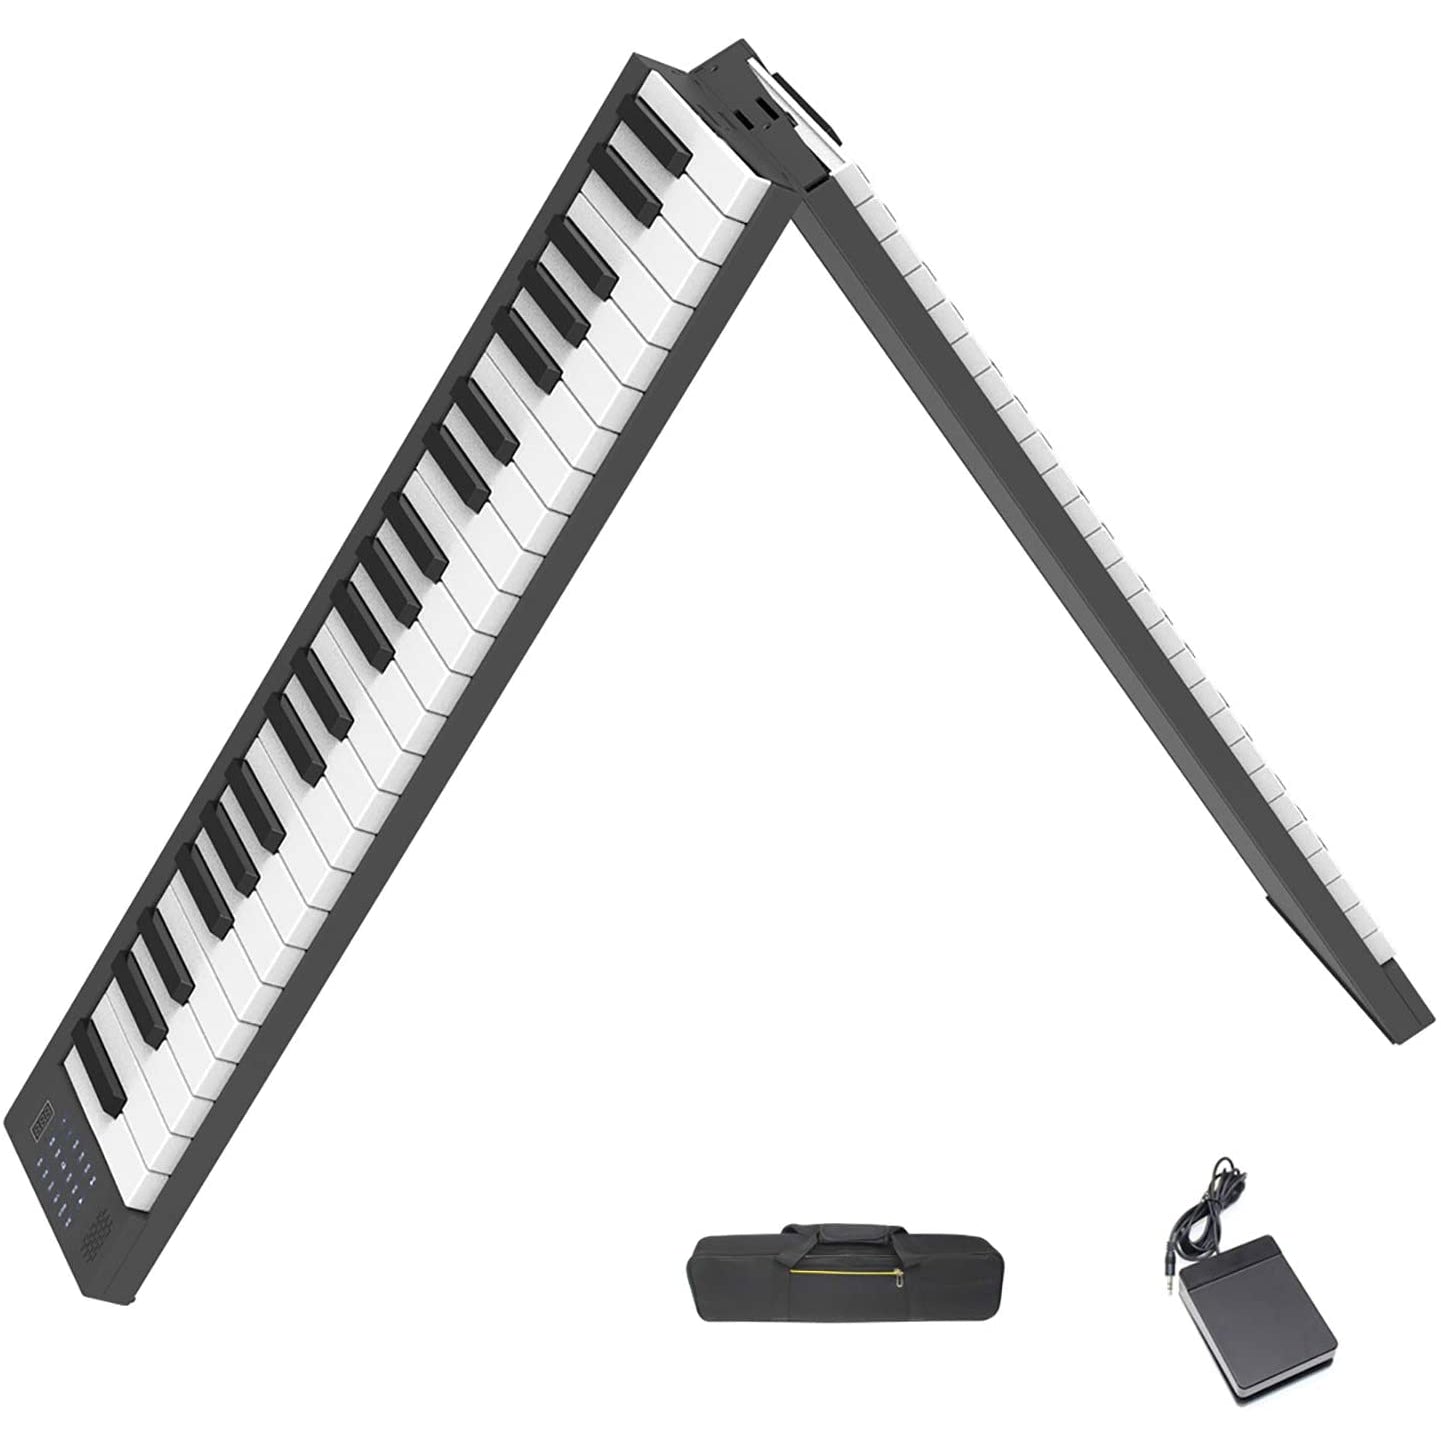 Veetop 88 Key Folding Beginner Digital Piano with Bluetooth for Kids and Adults